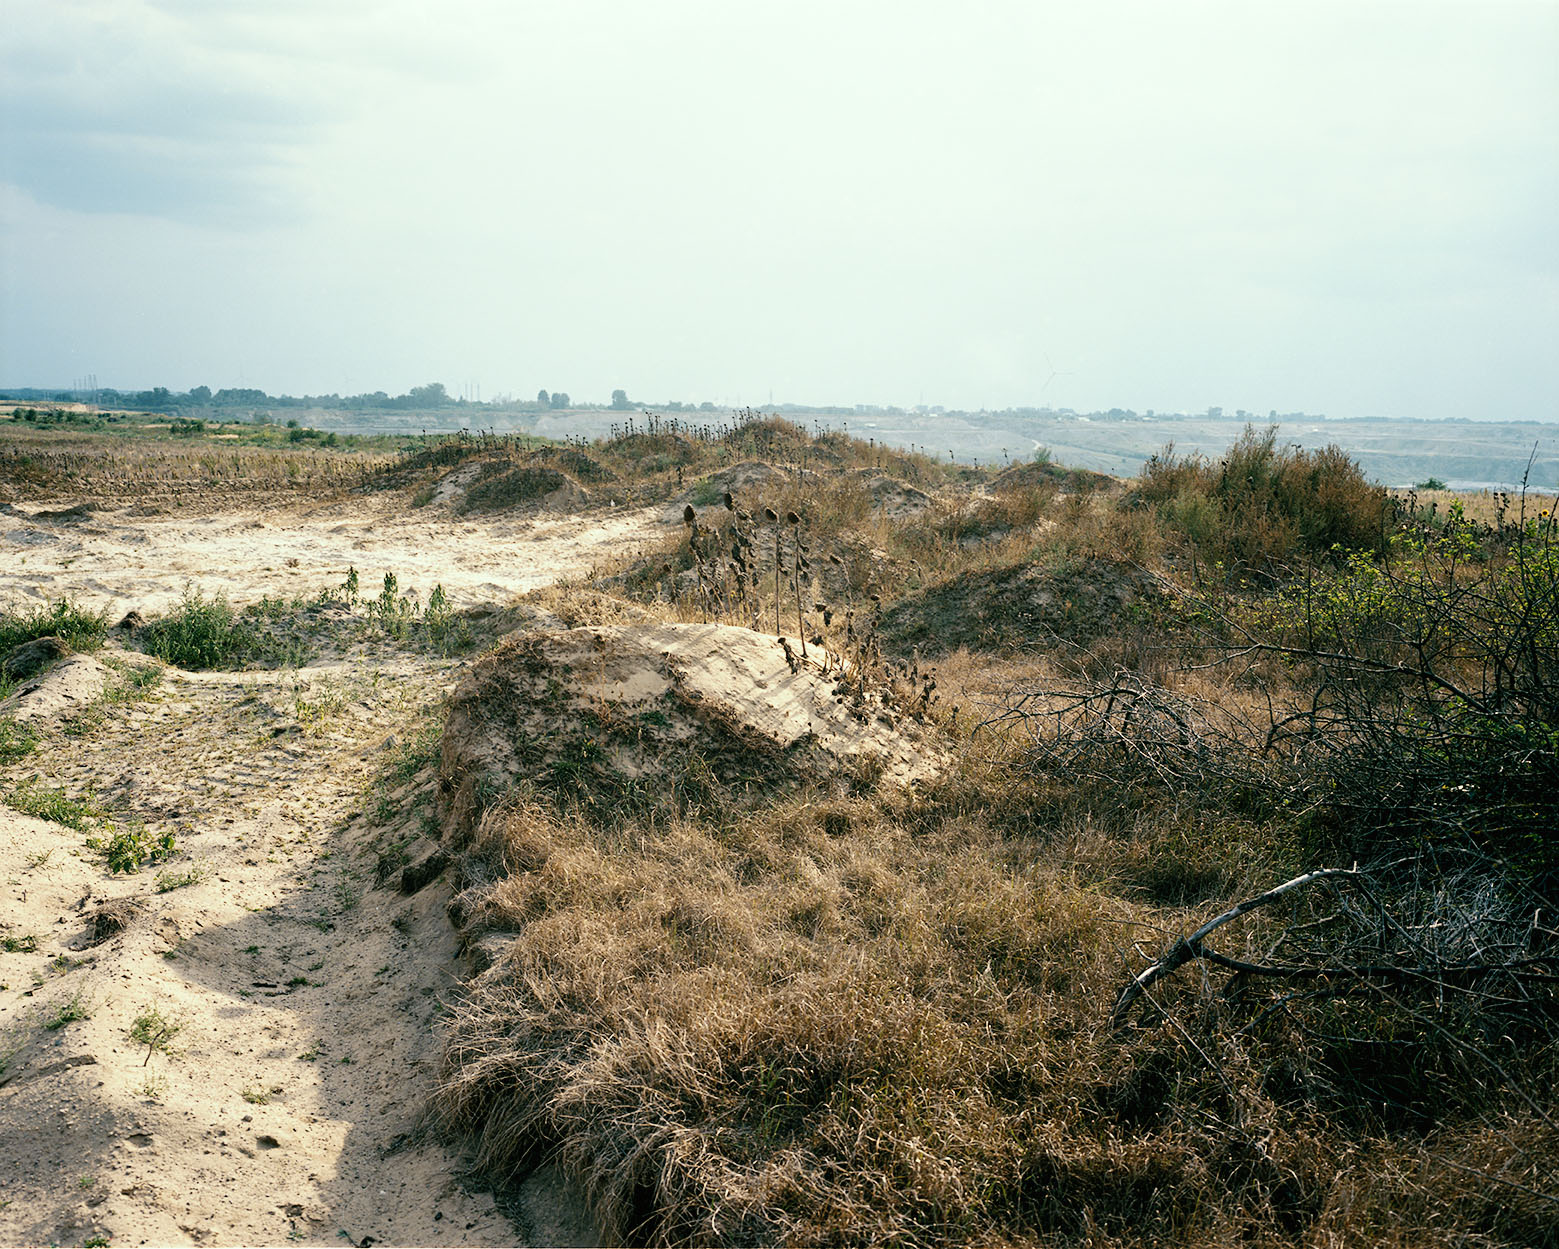 A sandy area on the left, and grass on the right.